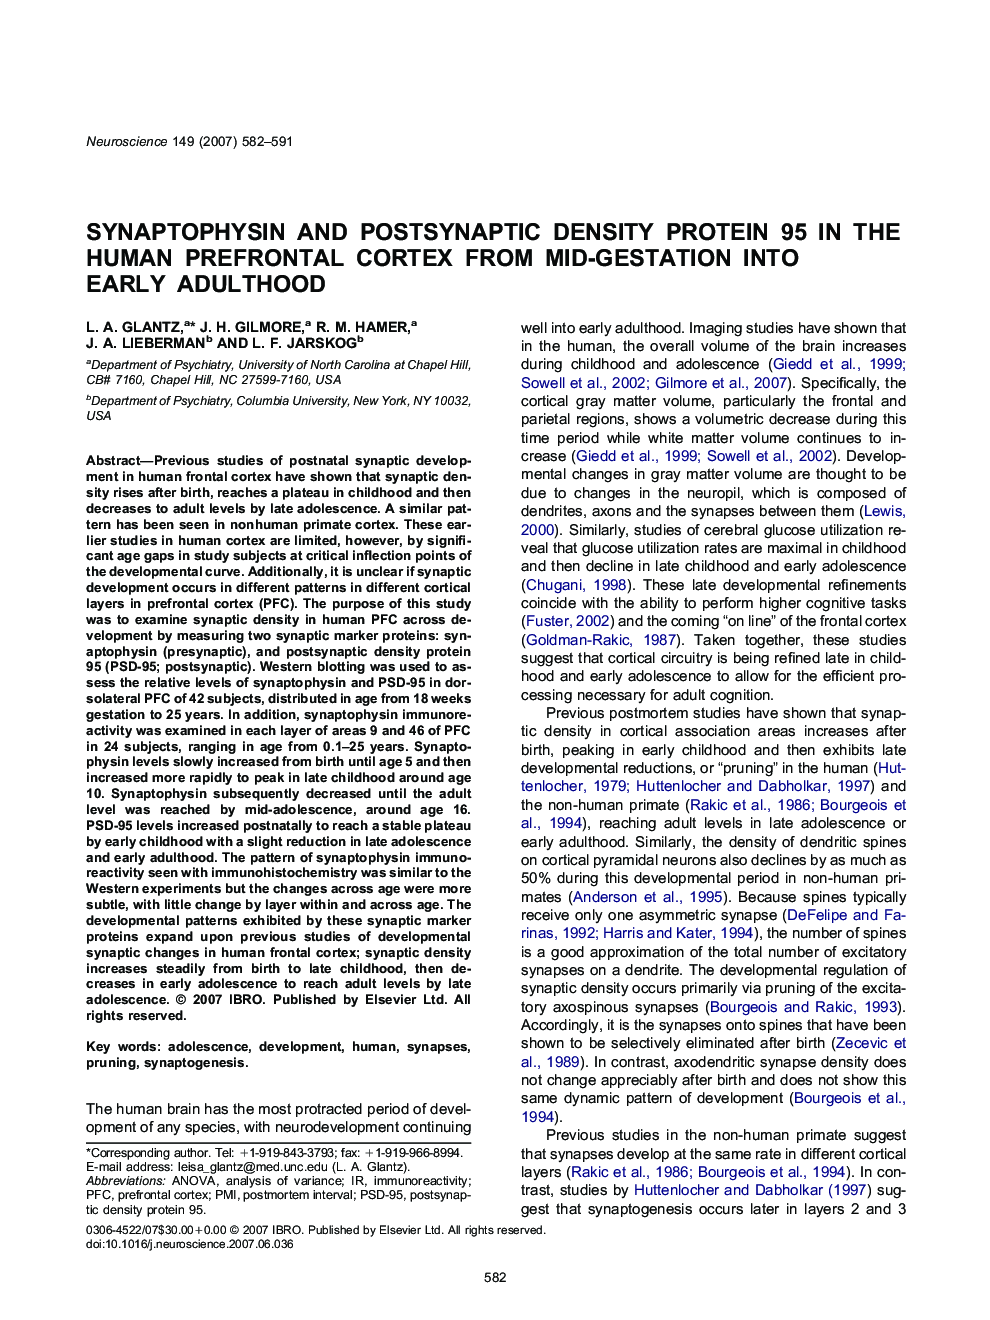 Synaptophysin and postsynaptic density protein 95 in the human prefrontal cortex from mid-gestation into early adulthood